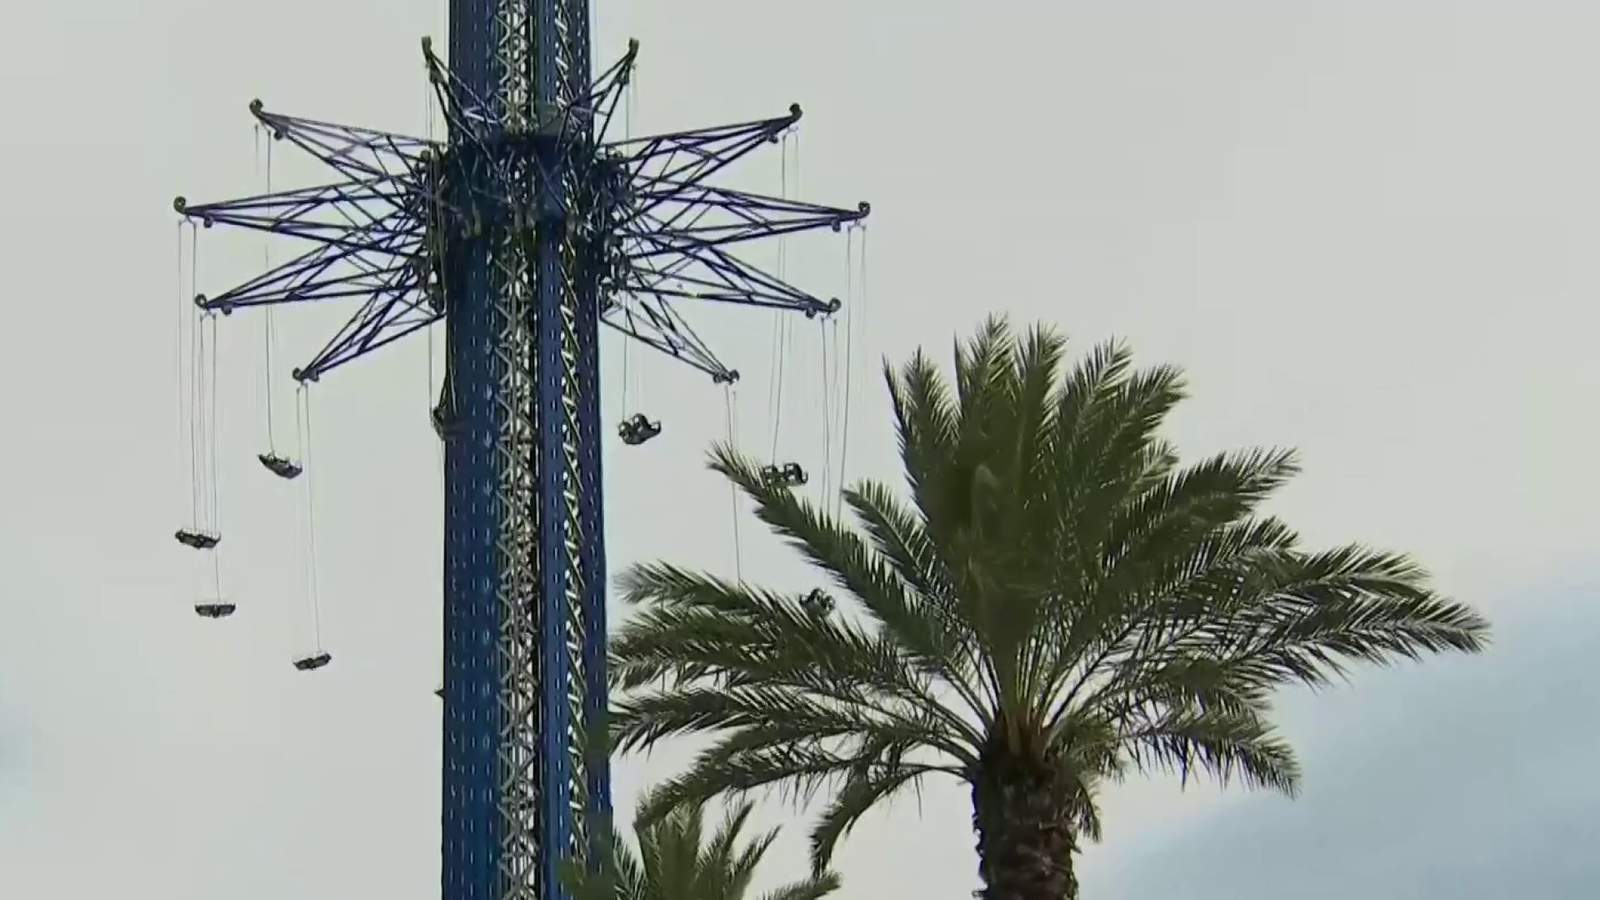 Victim in StarFlyer accident made sure harness was secure before fatal fall, witness says